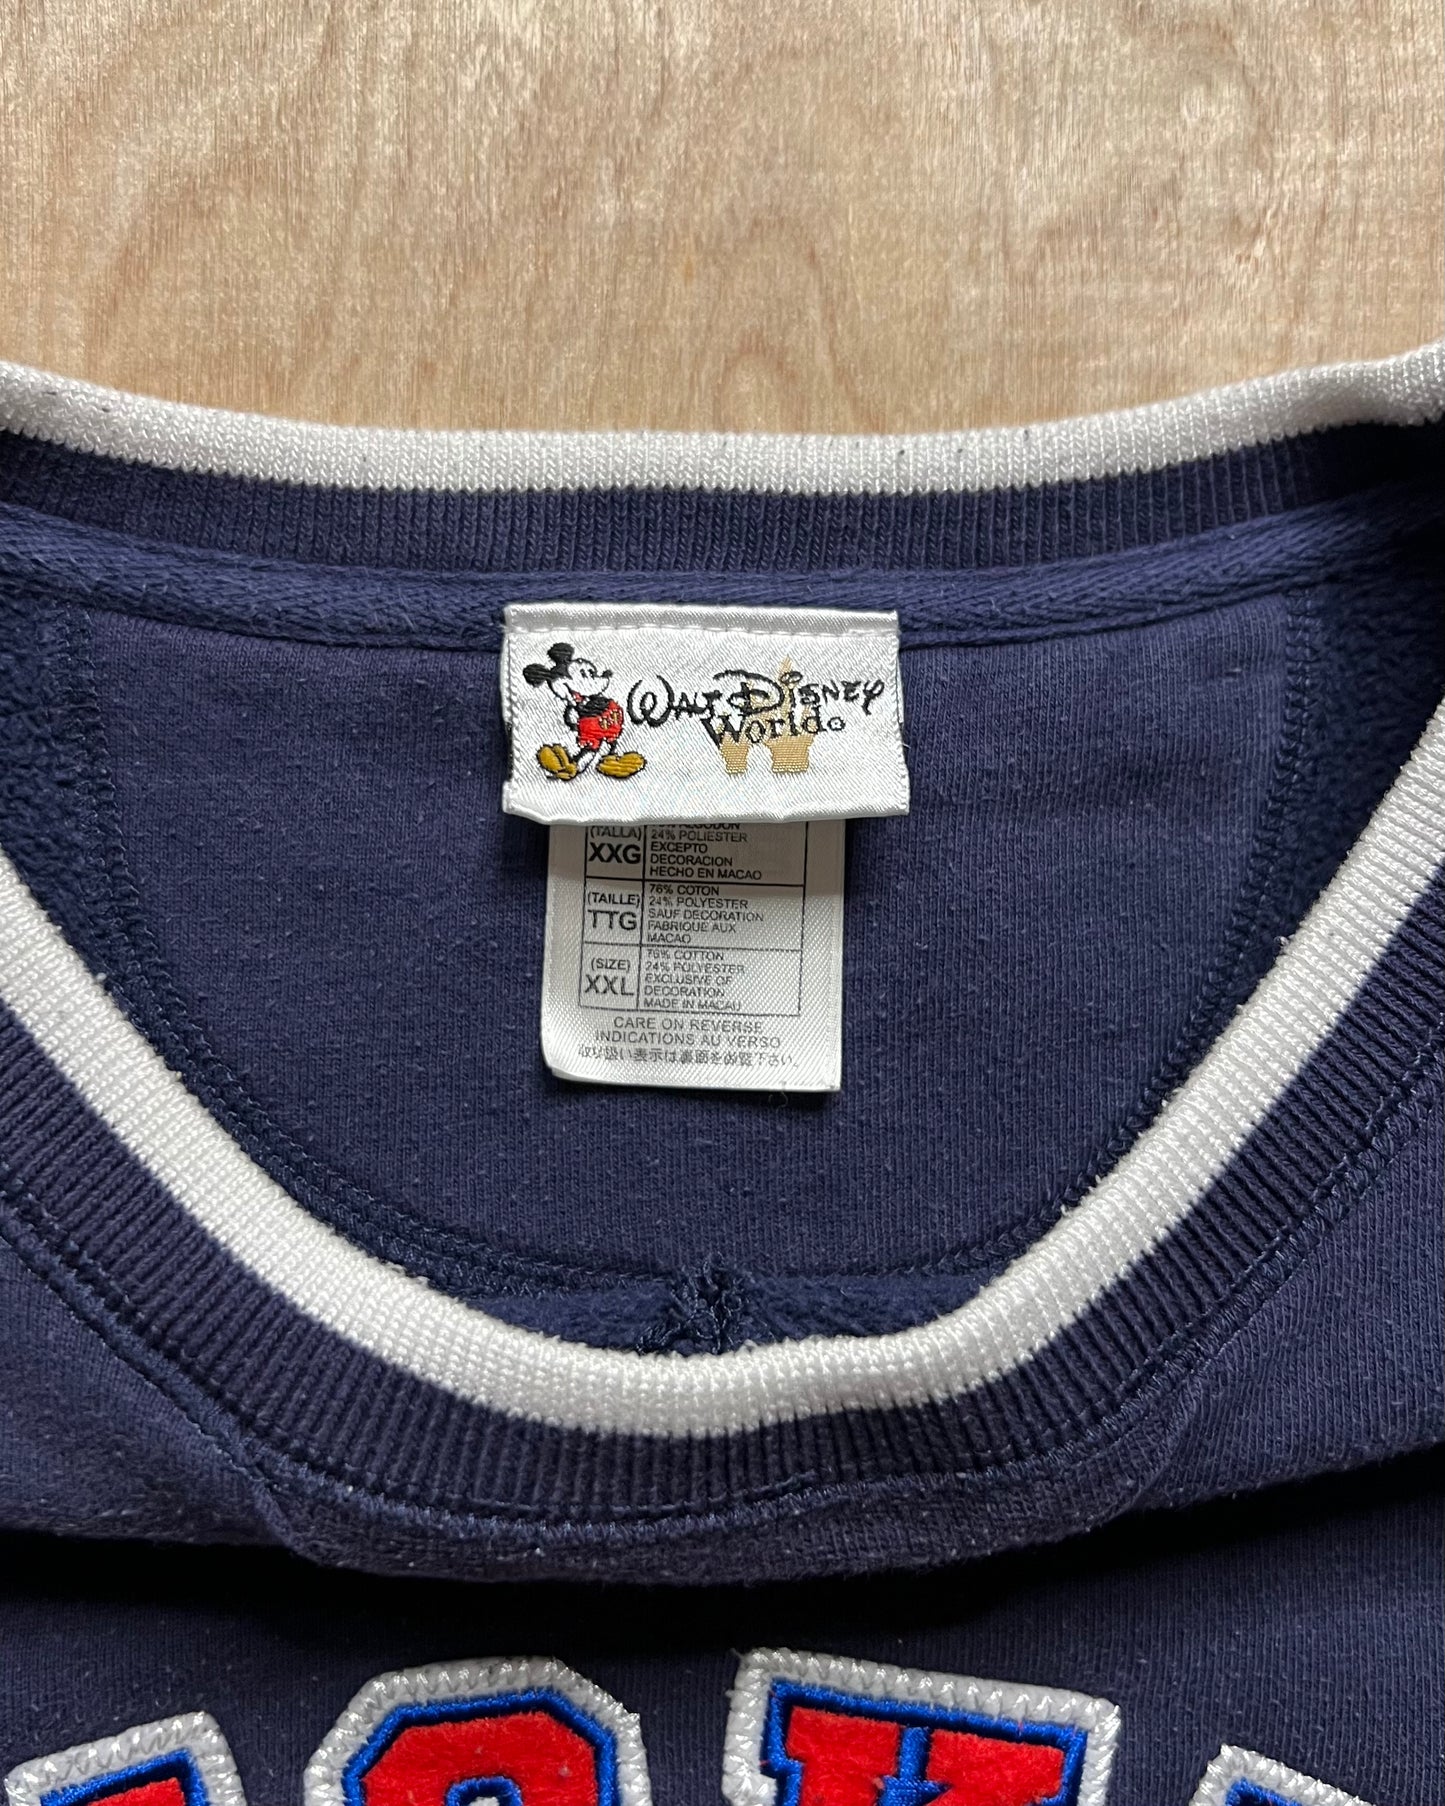 Early 2000's Mickey Mouse Crewneck